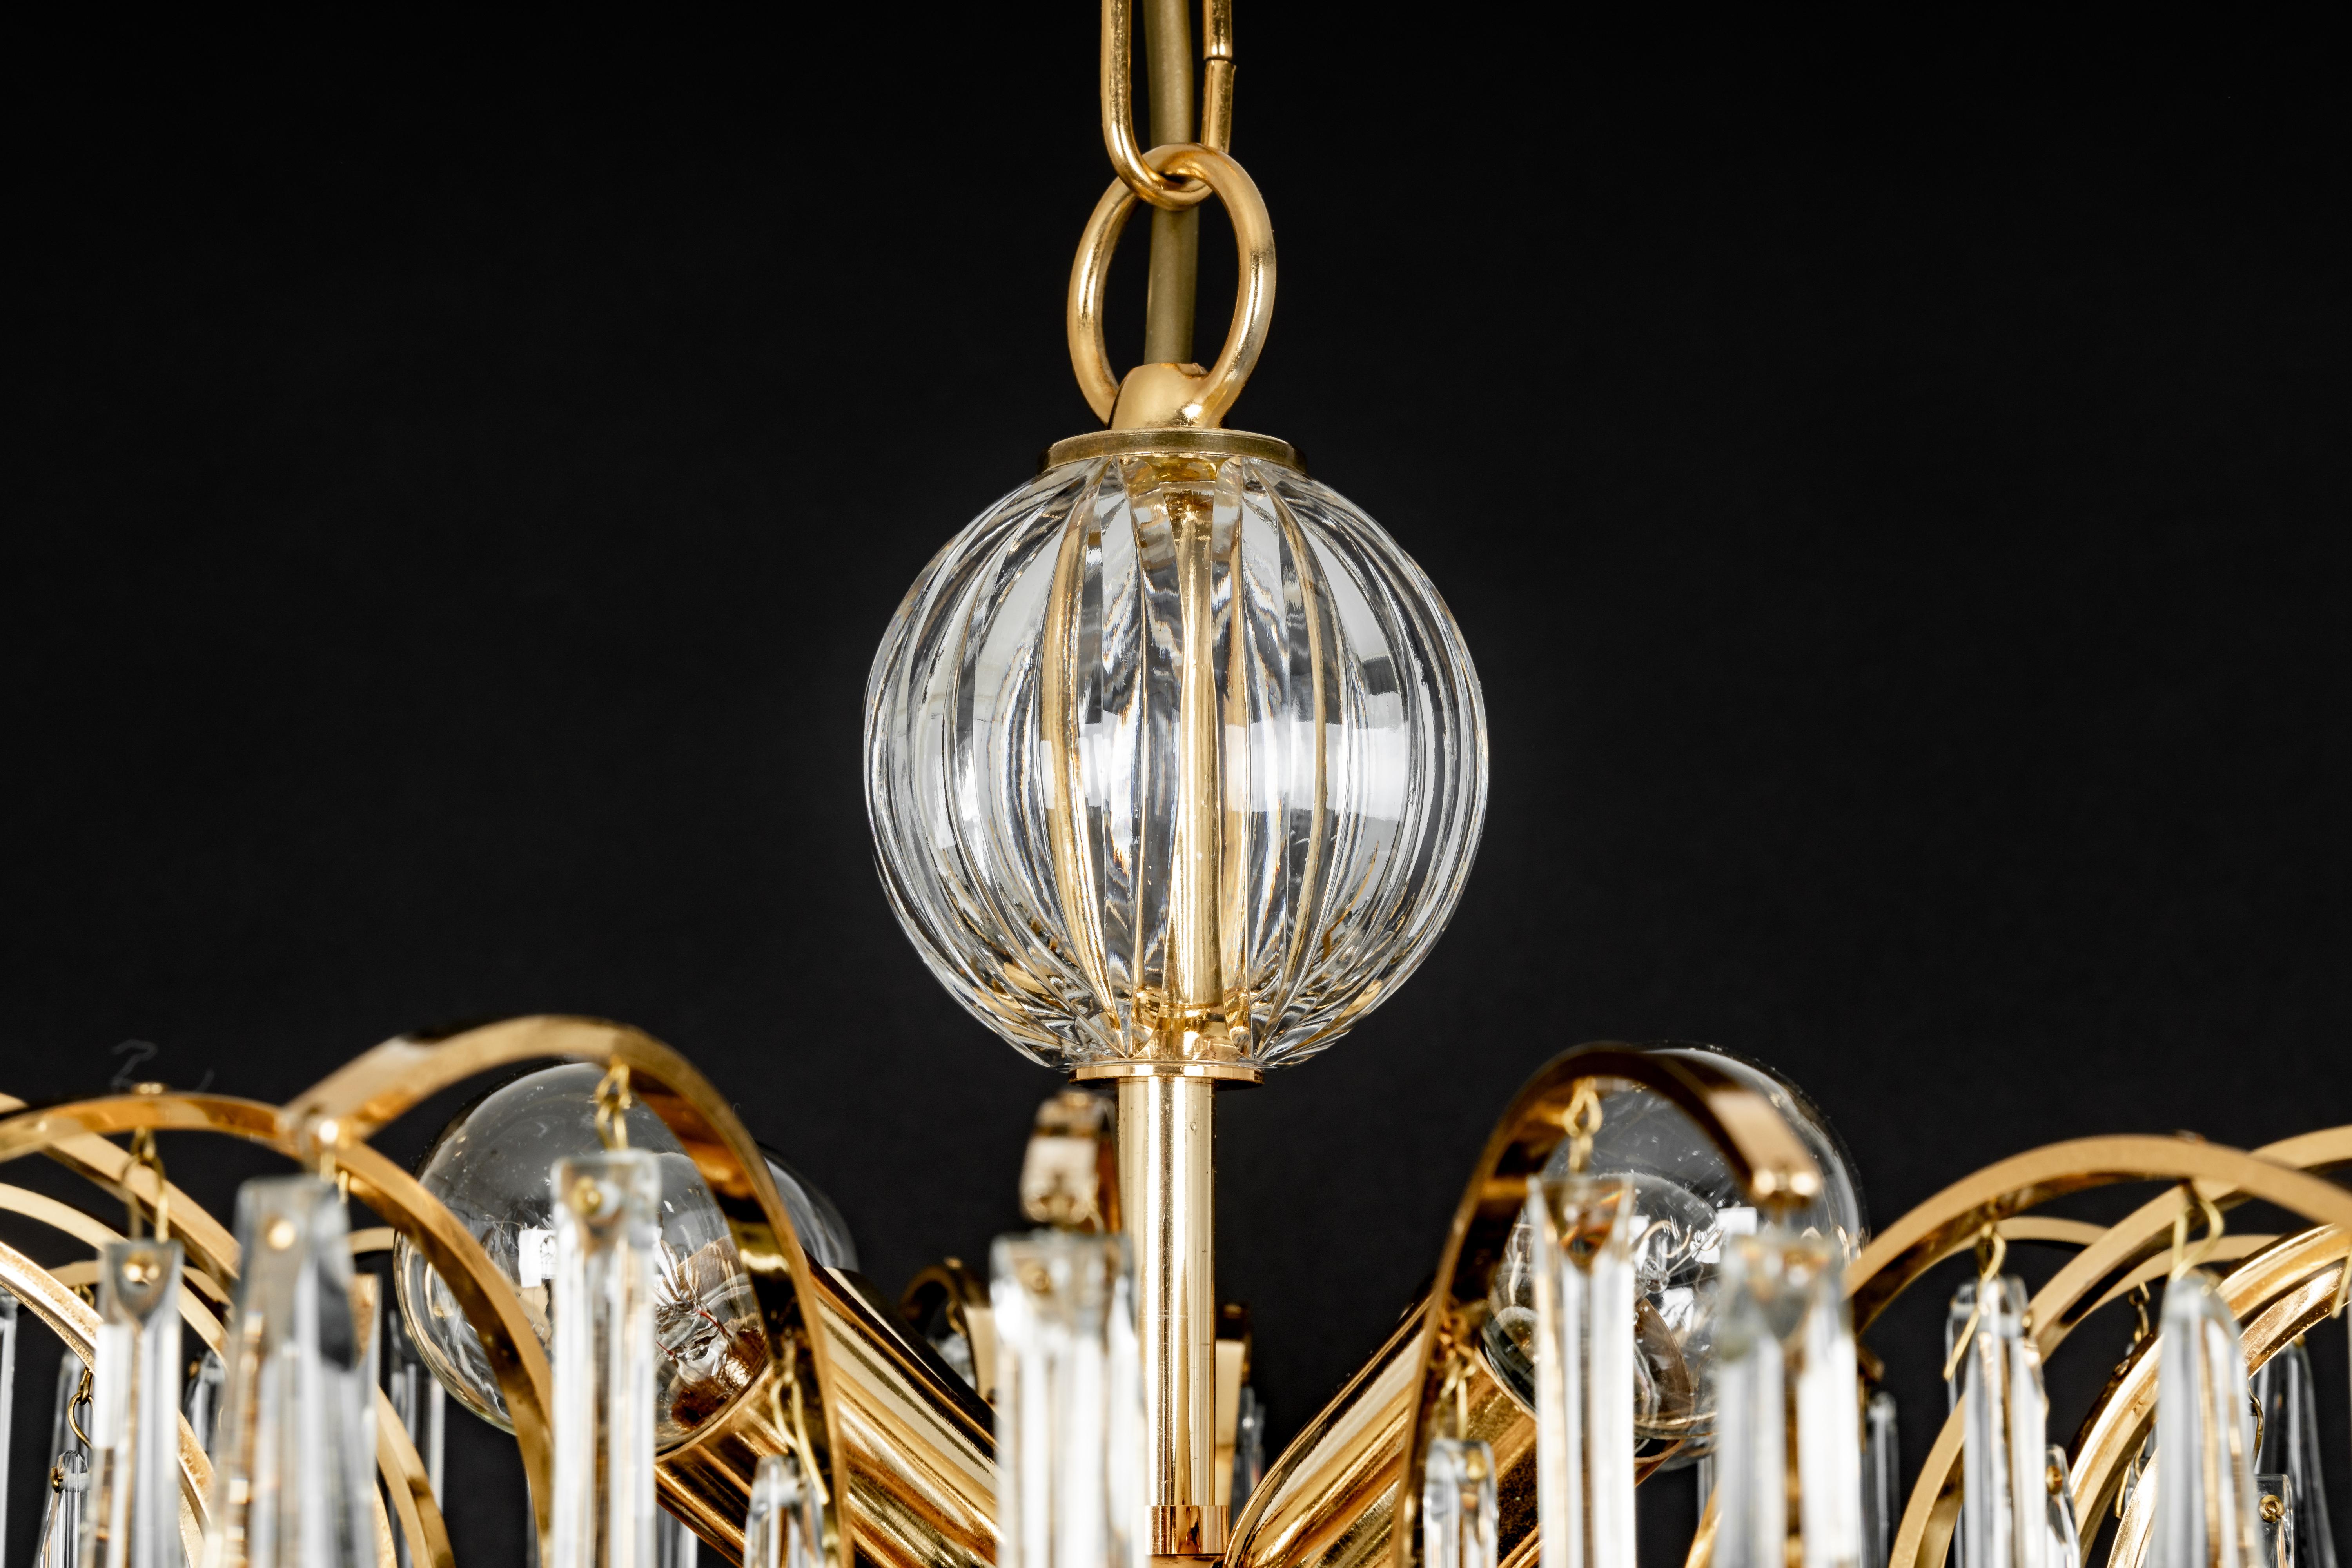 1 of 2 Large Murano Glass Tear Drop Chandelier, Christoph Palme, Germany, 1970s For Sale 11